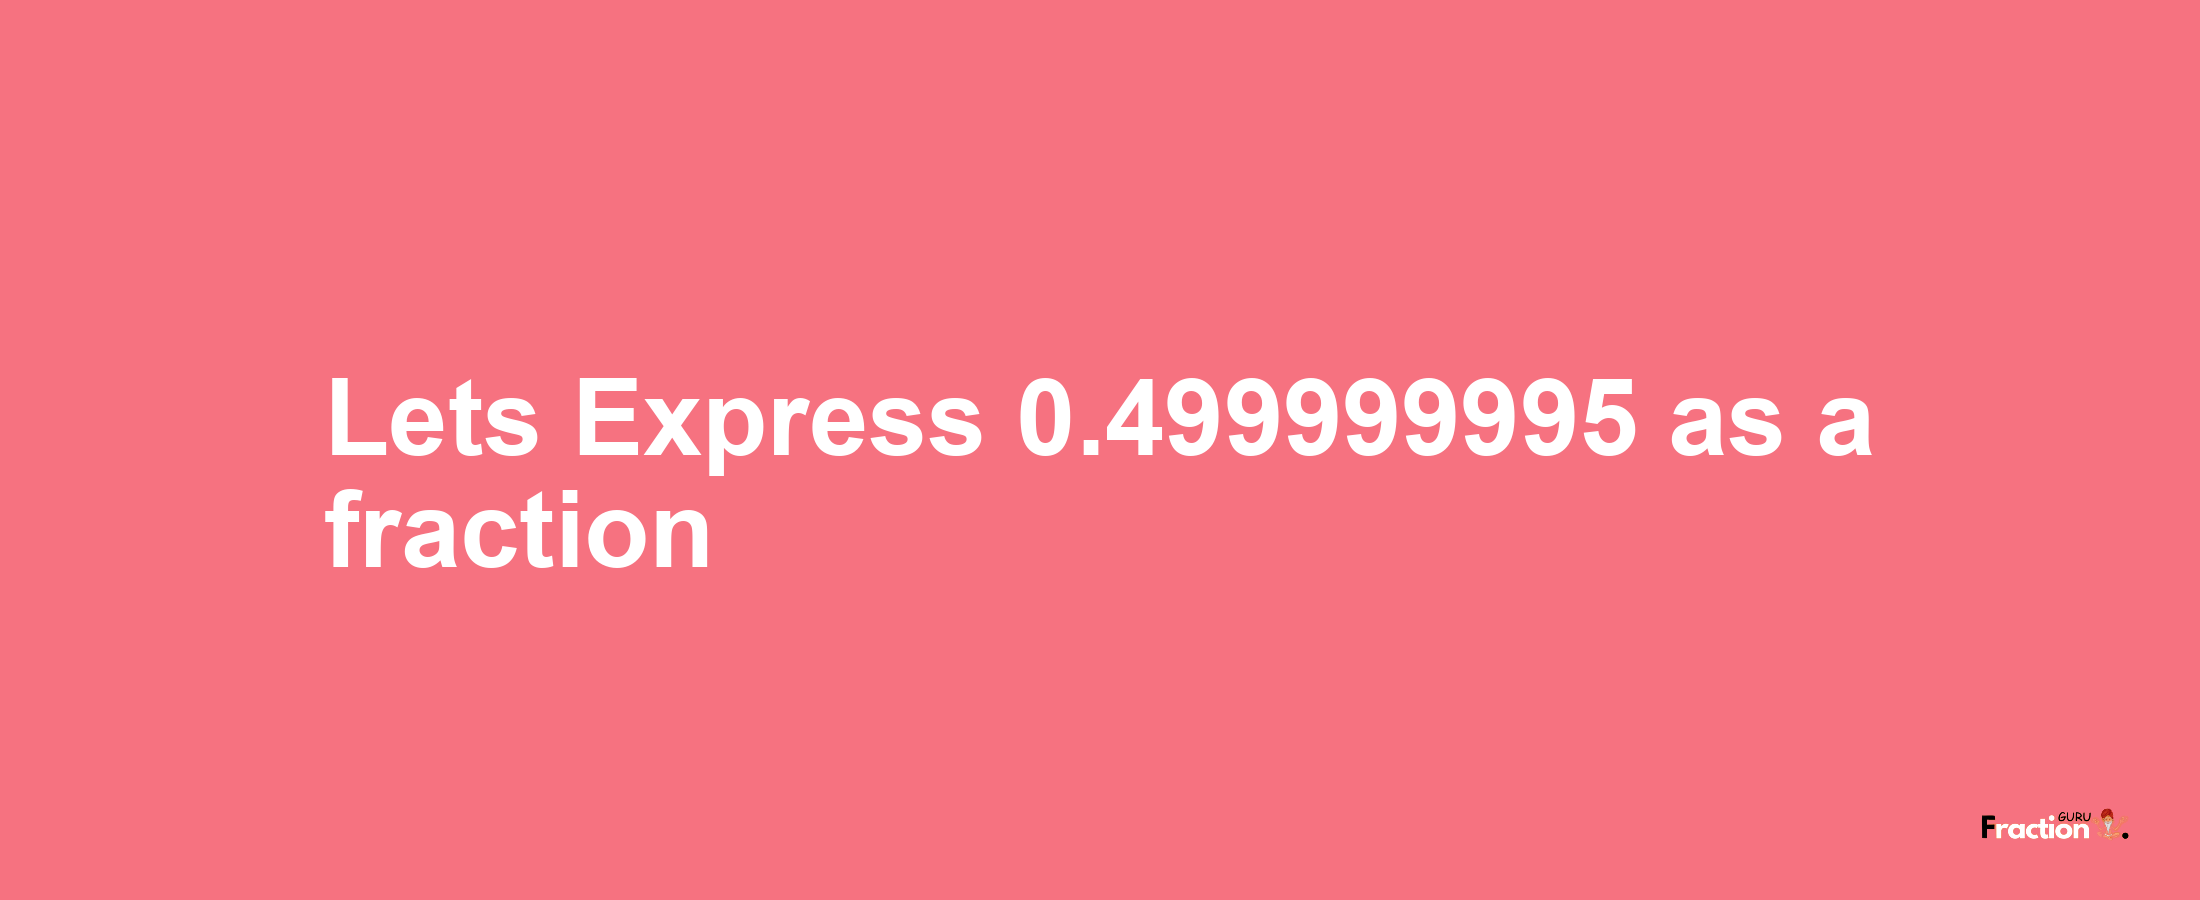 Lets Express 0.499999995 as afraction